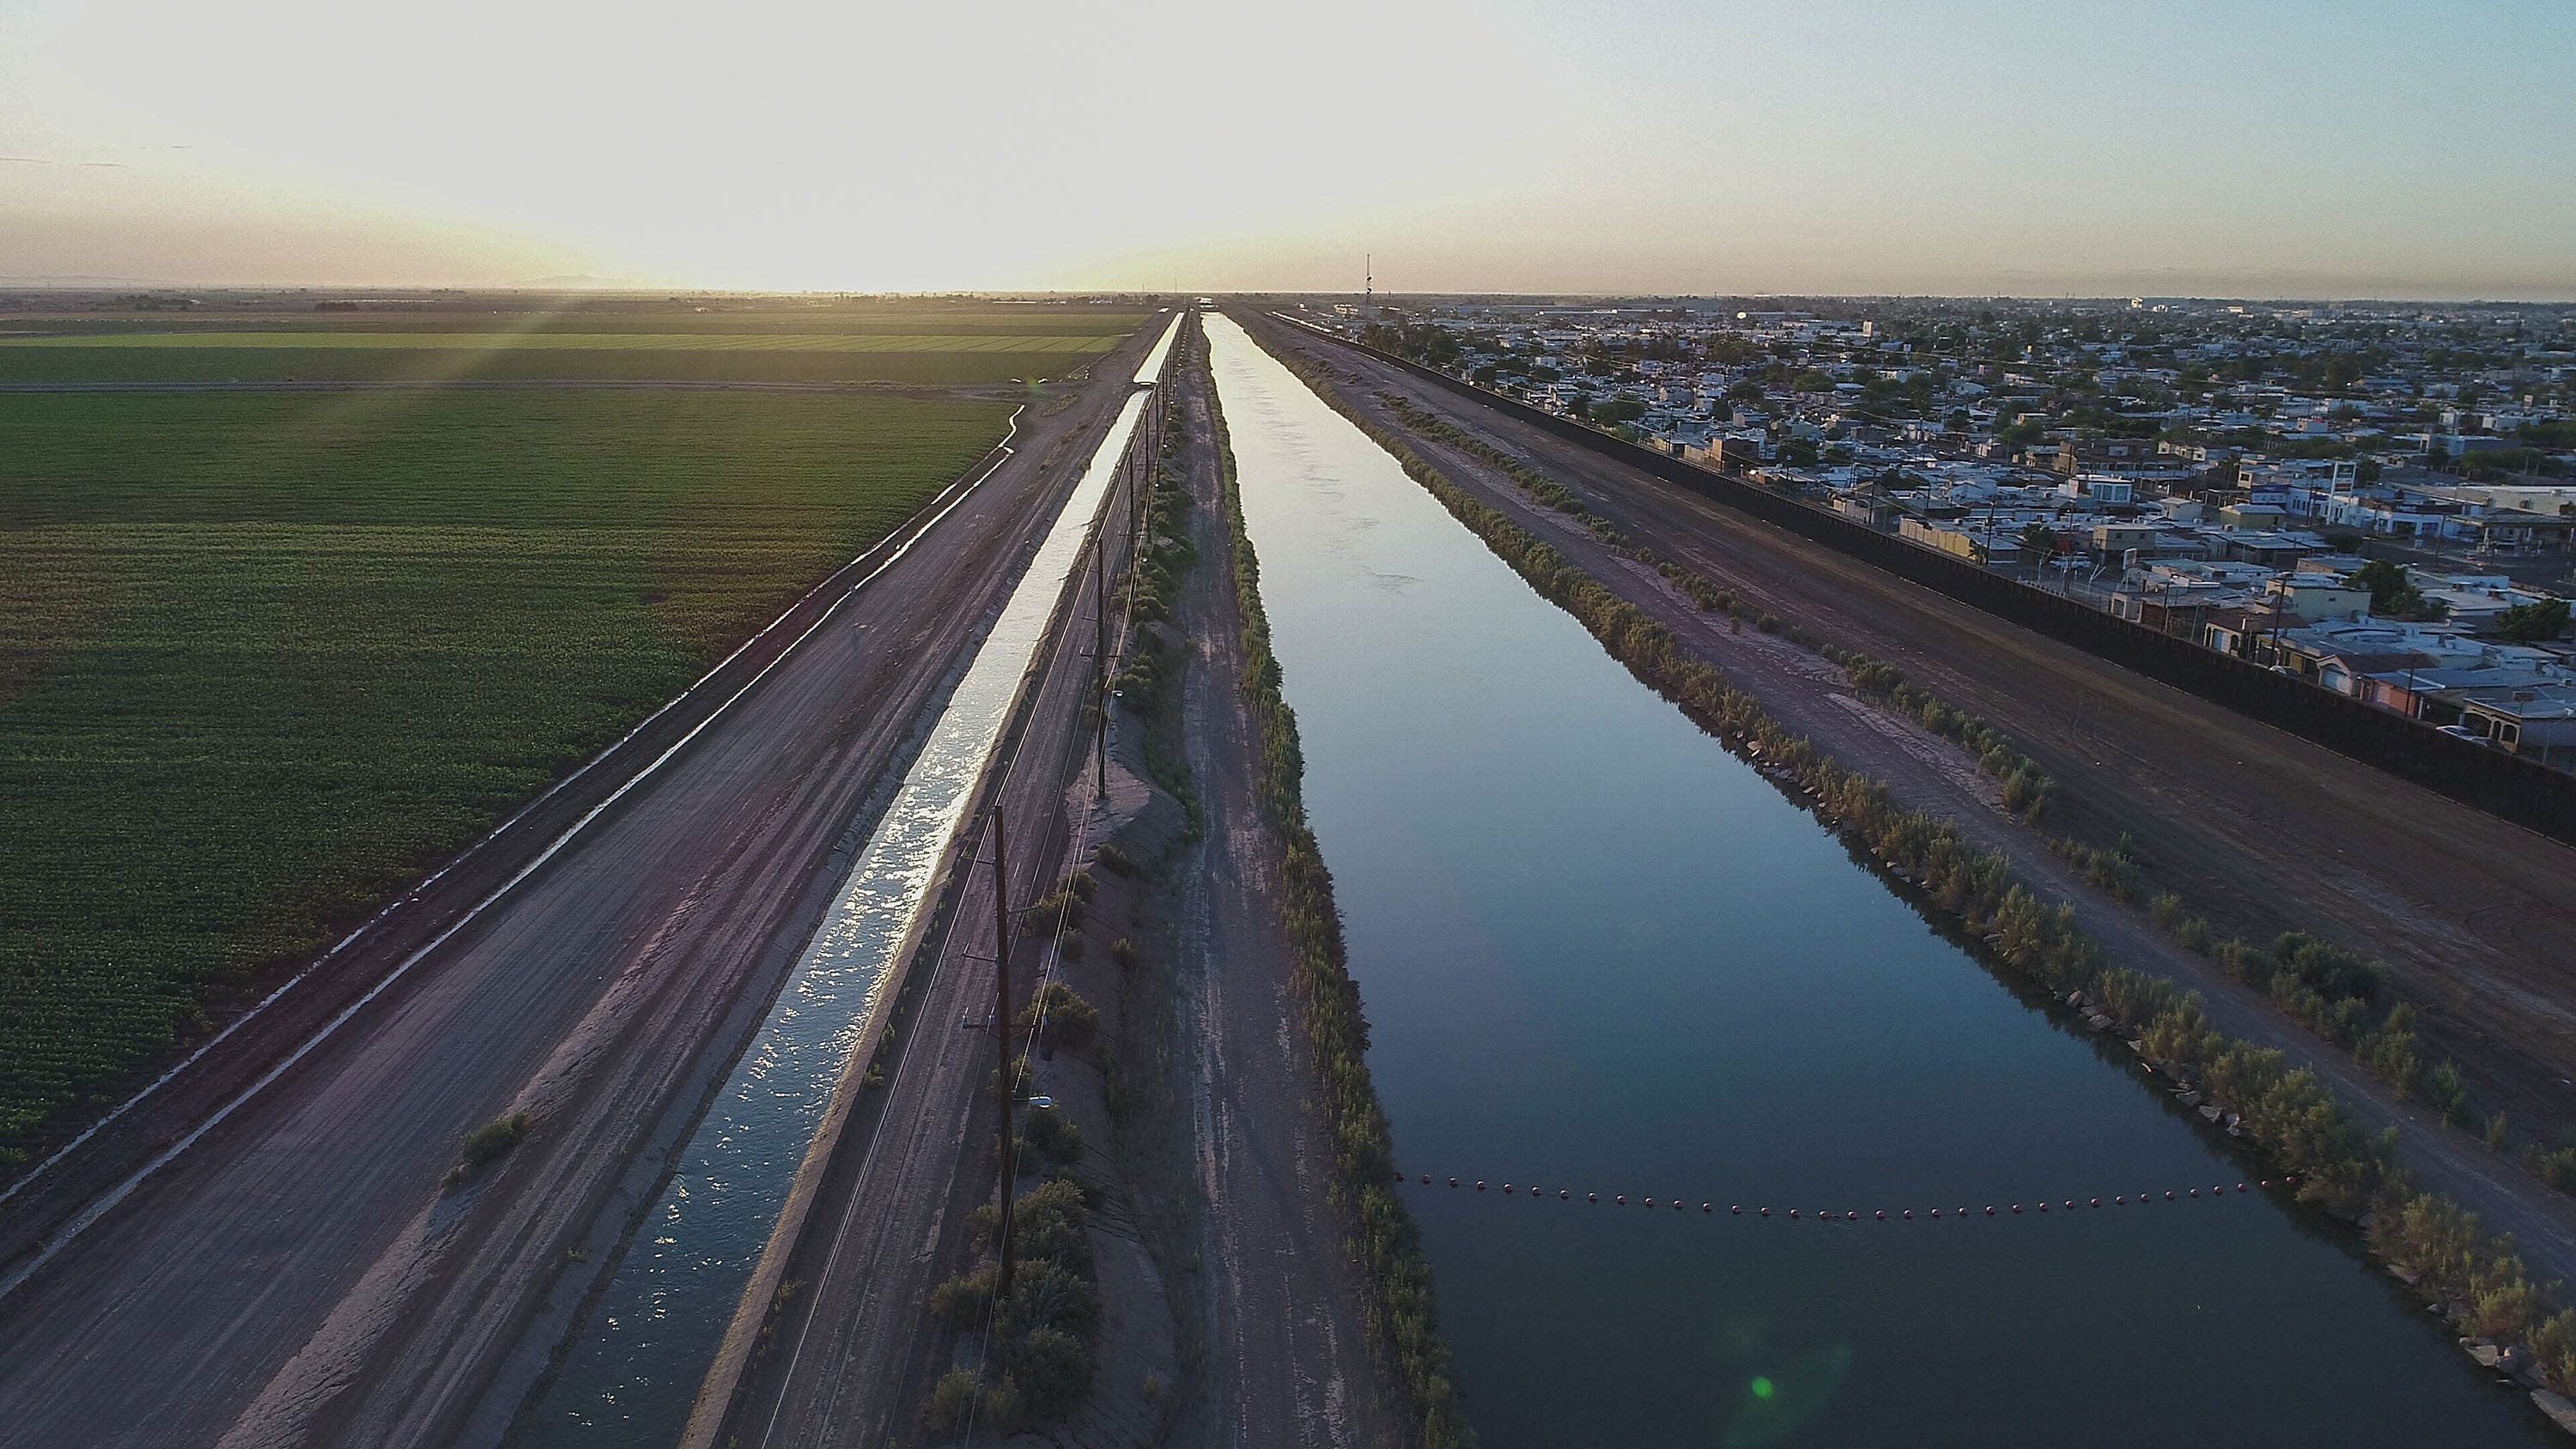 The All-American Canal runs along the U.S.-Mexico border outside Mexicali, bringing Colorado River water to the farm fields of California's Imperial Valley.